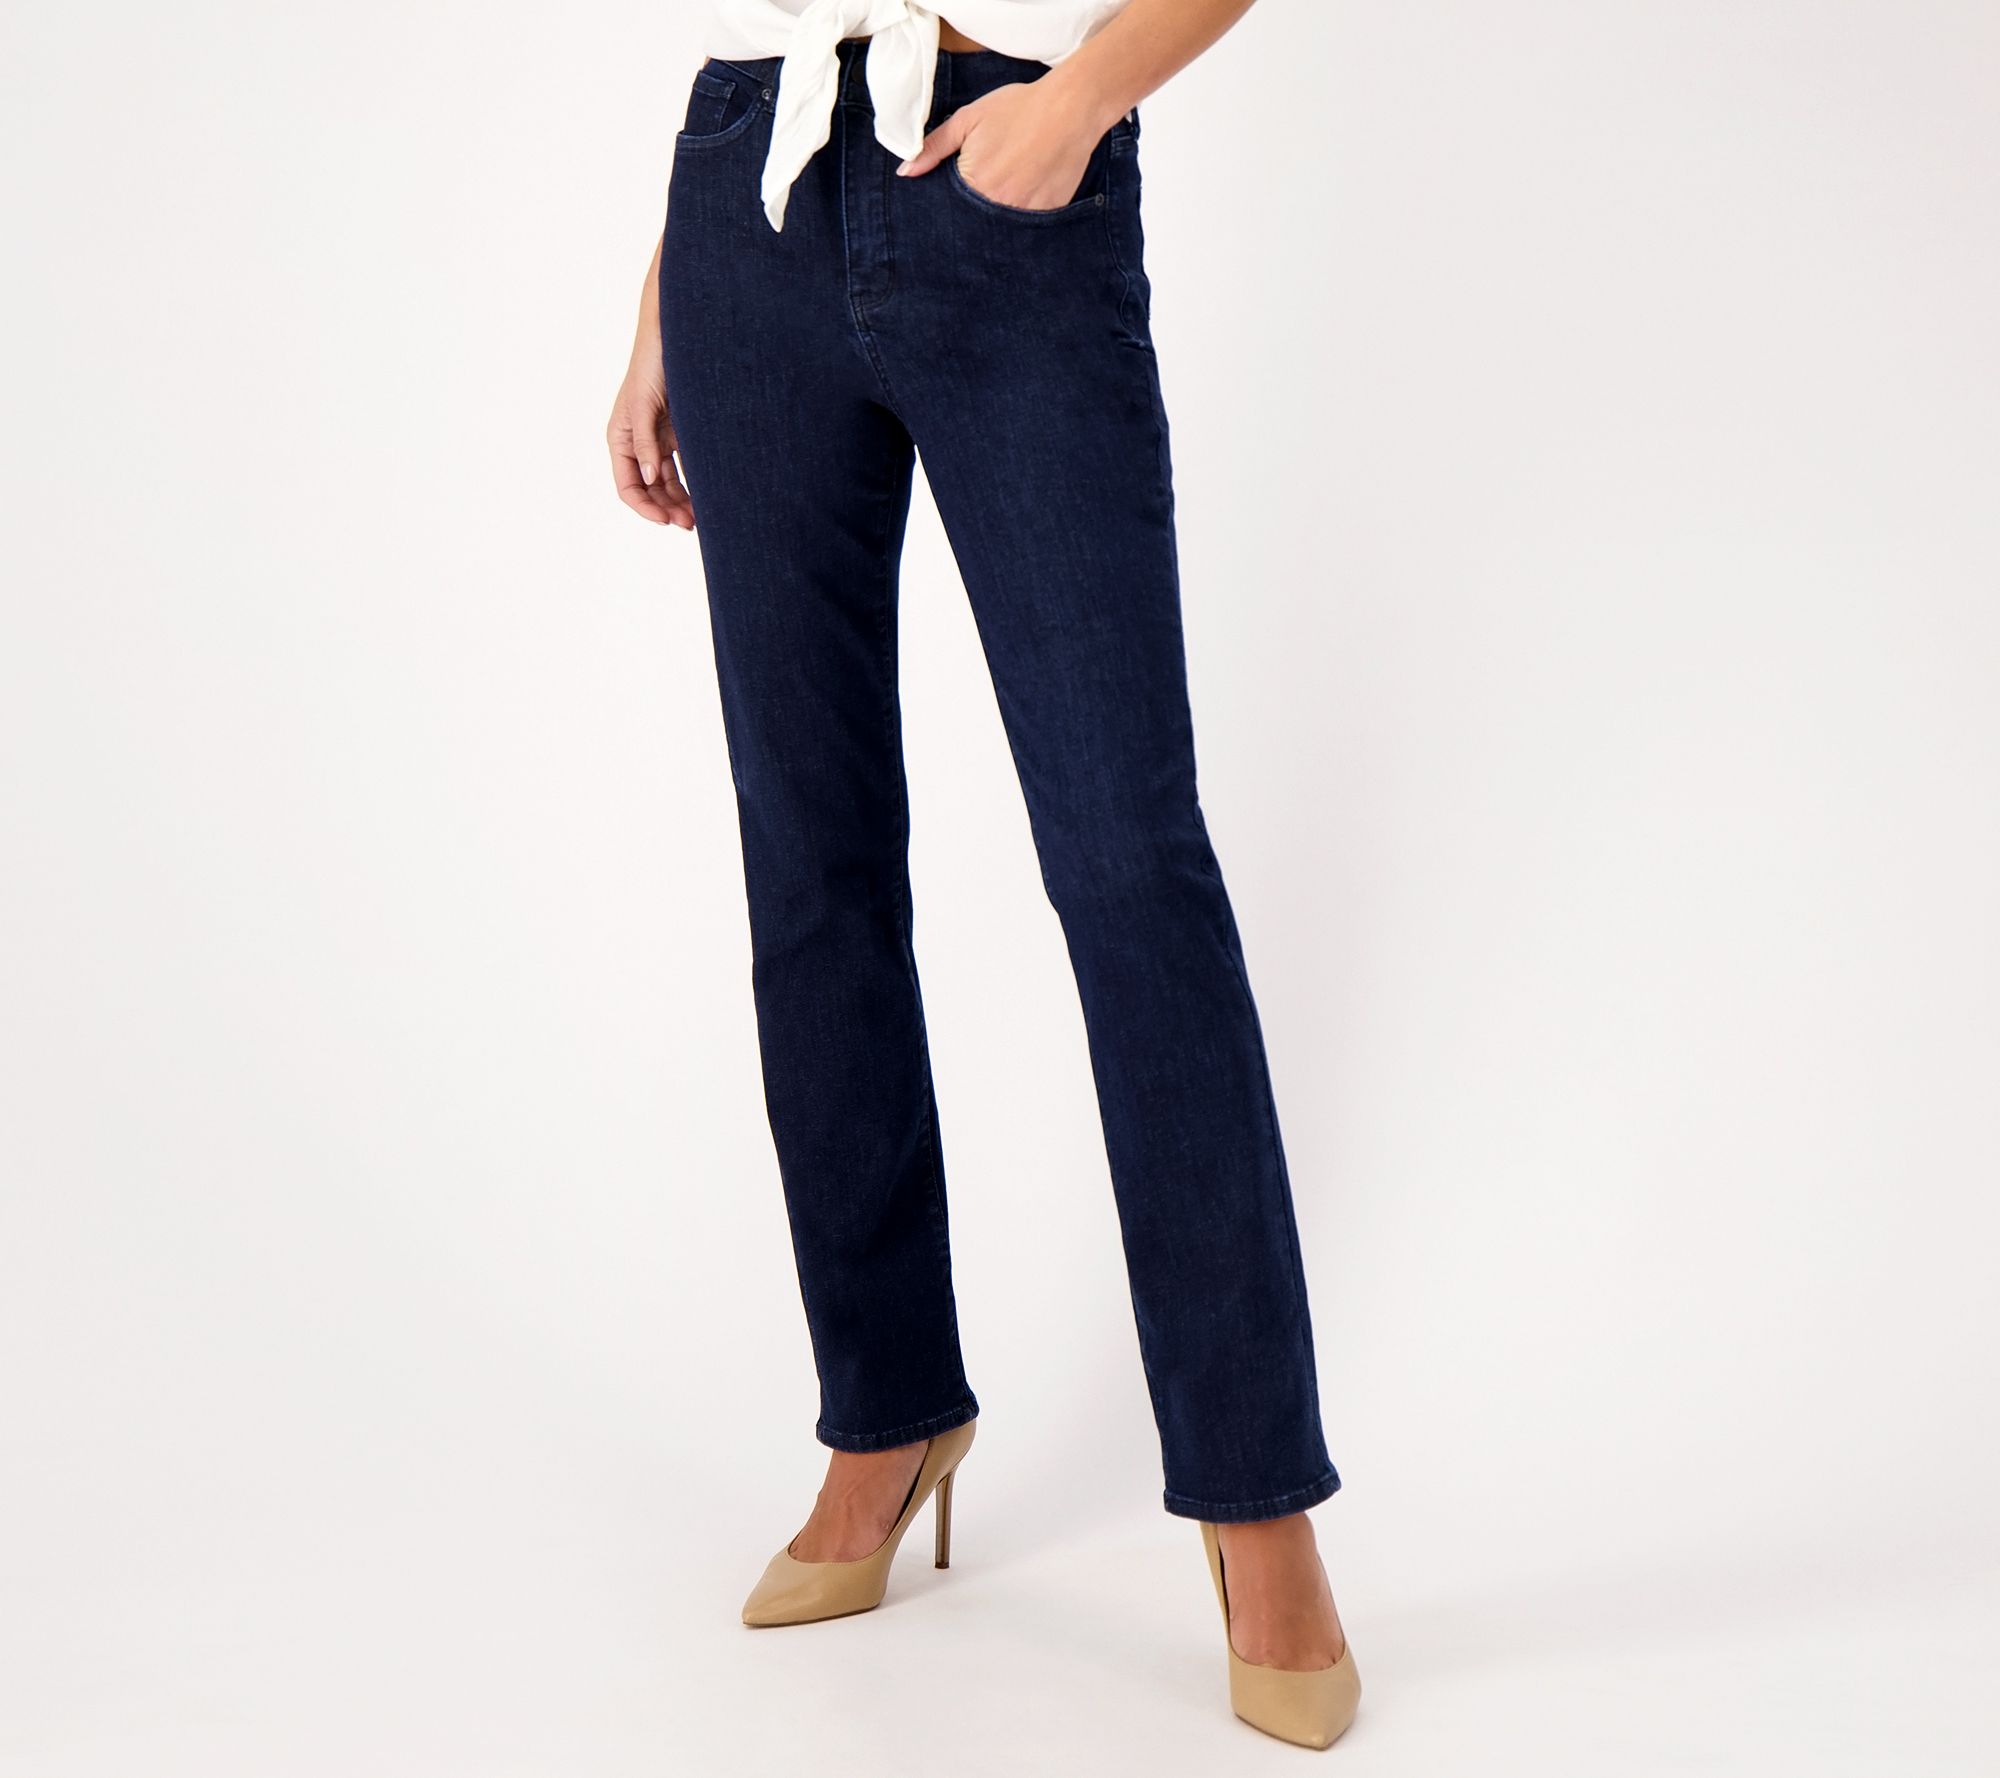 Curve Shaper™ Marilyn Straight Ankle Jeans With Super High Rise